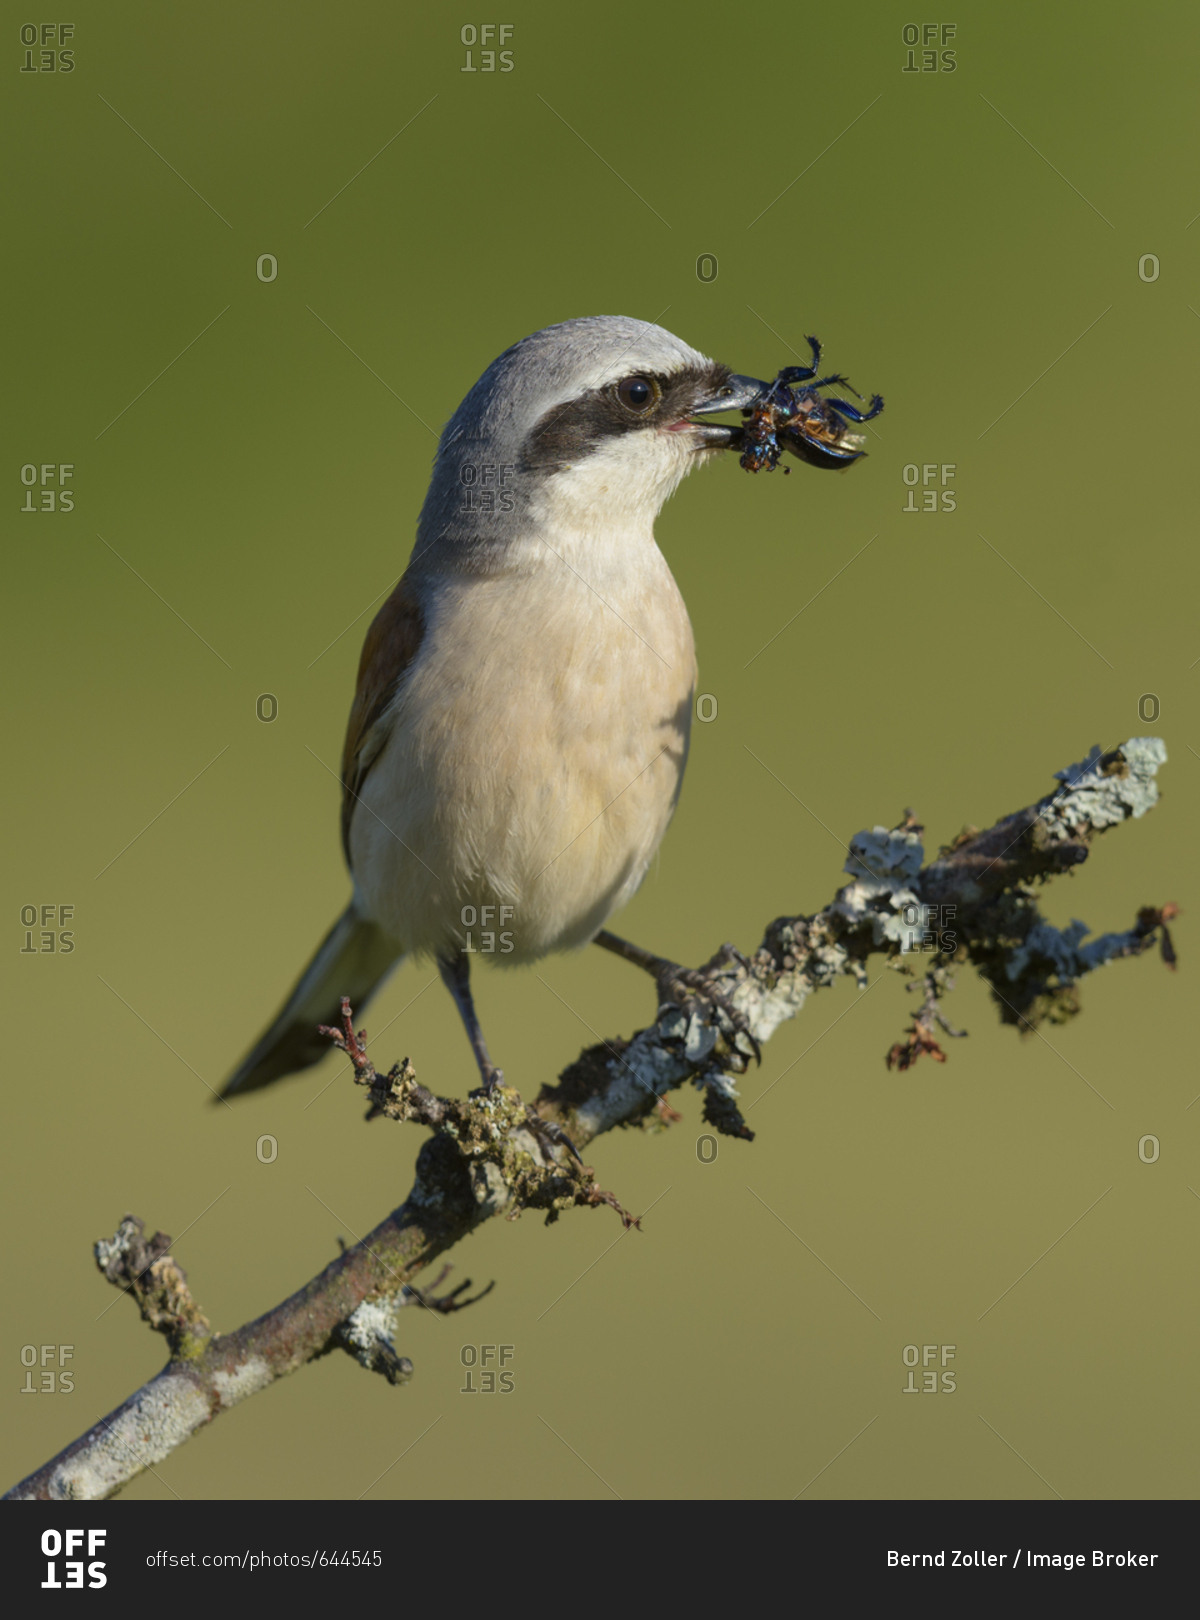 Red-backed shrike (Lanius collurio), male on branch with prey, insect, biosphere field Swabian Alb, Baden-Wurttemberg, Germany, Europe